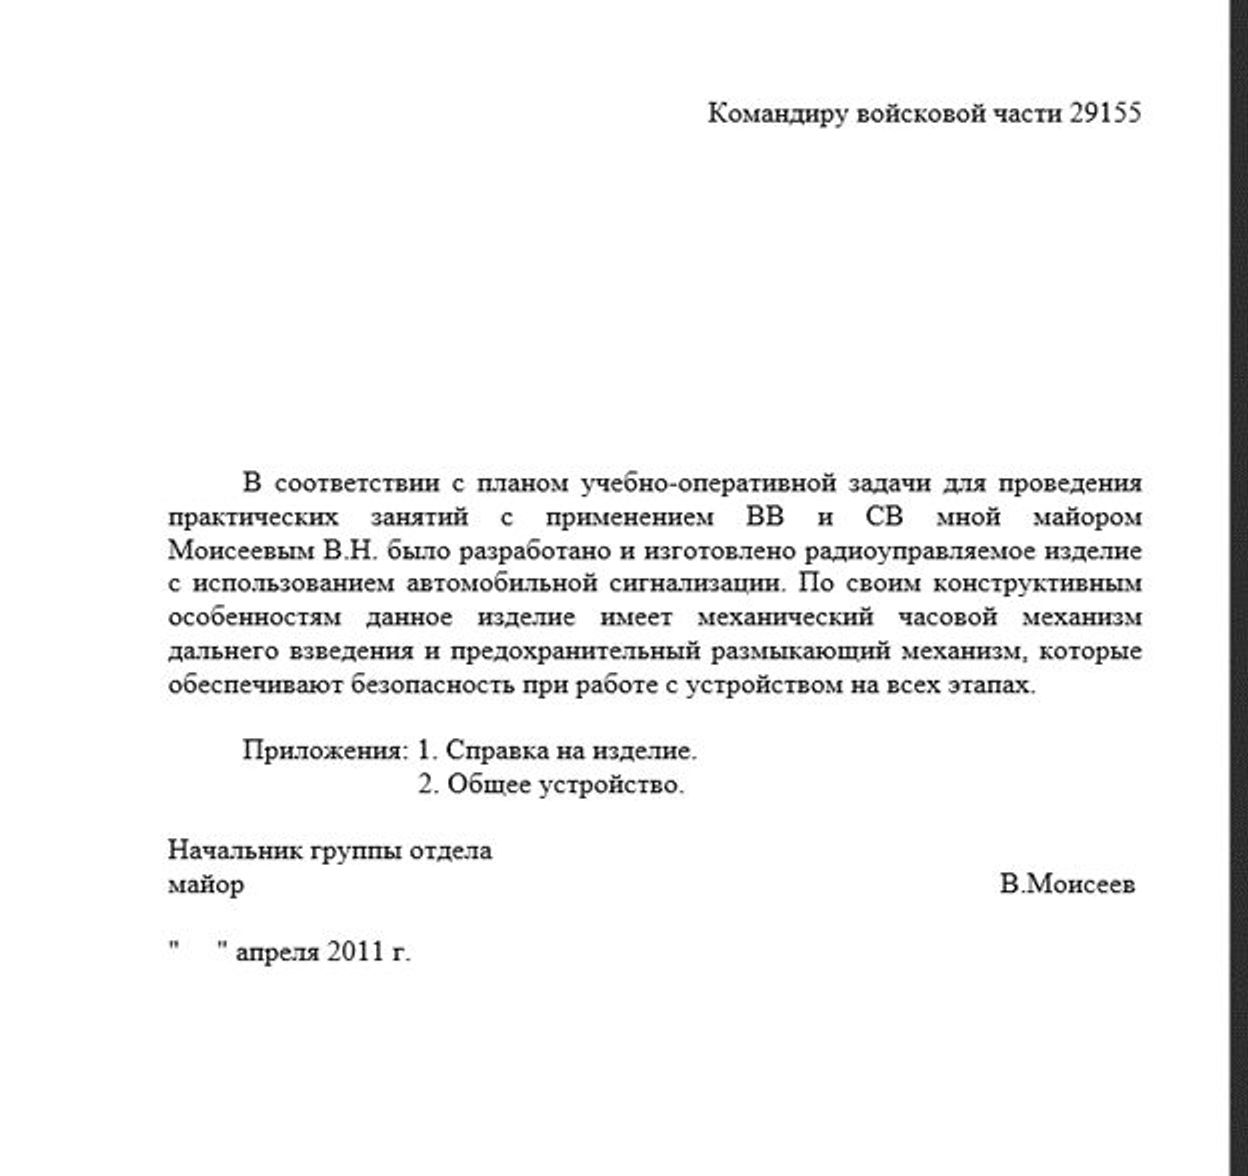 Report from Maj. Vladimir Moiseev to Andrey Averyanov, one of the three spies who manufactured remote-controlled explosive triggering units